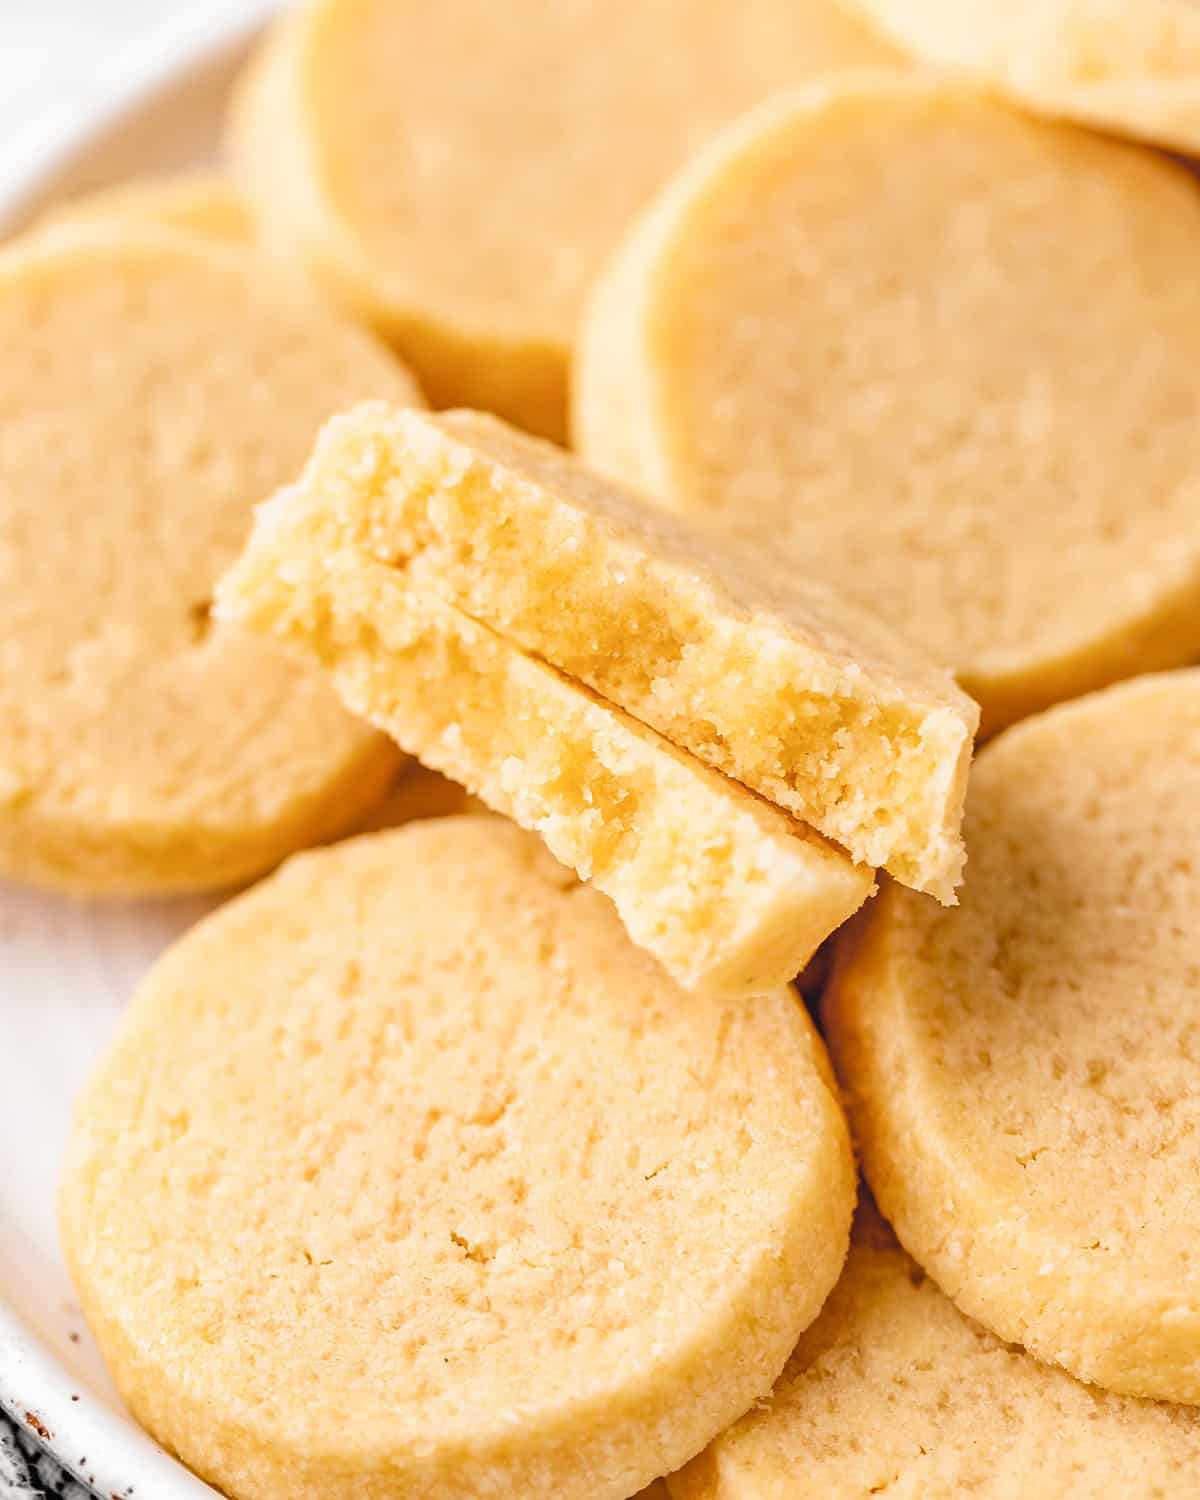 a shortbread cookie cut in half with the inside visible